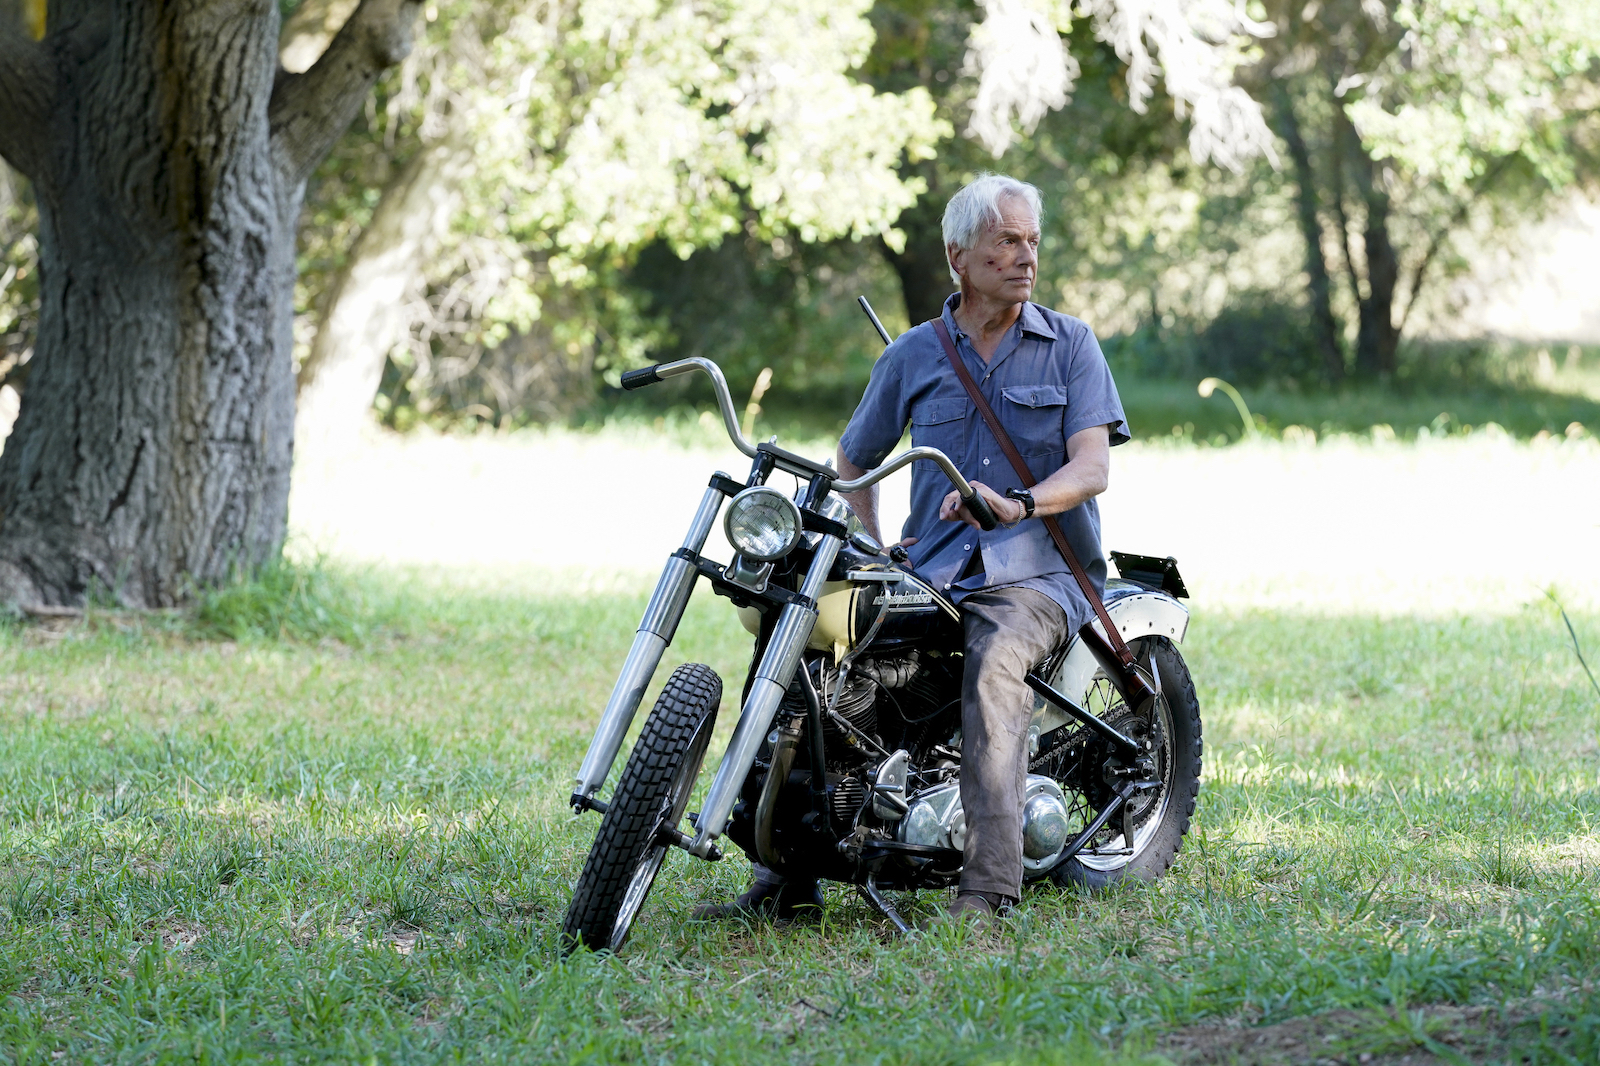 Mark Harmon in 'NCIS' riding a motorcycle